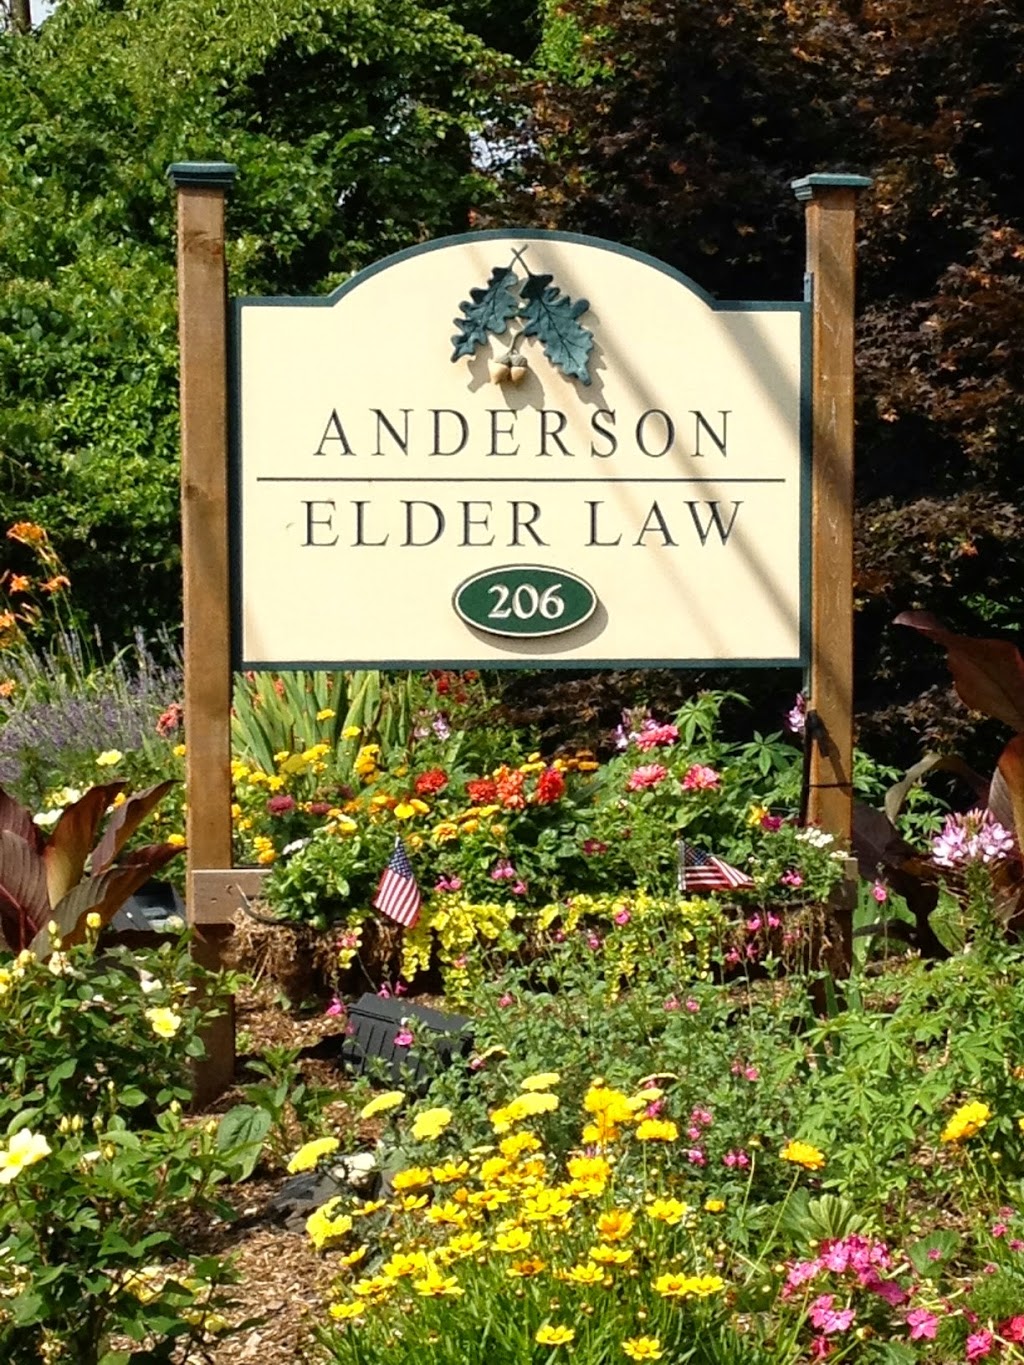 Linda M. Anderson | 206 Old State Rd, Media, PA 19063 | Phone: (610) 566-4700